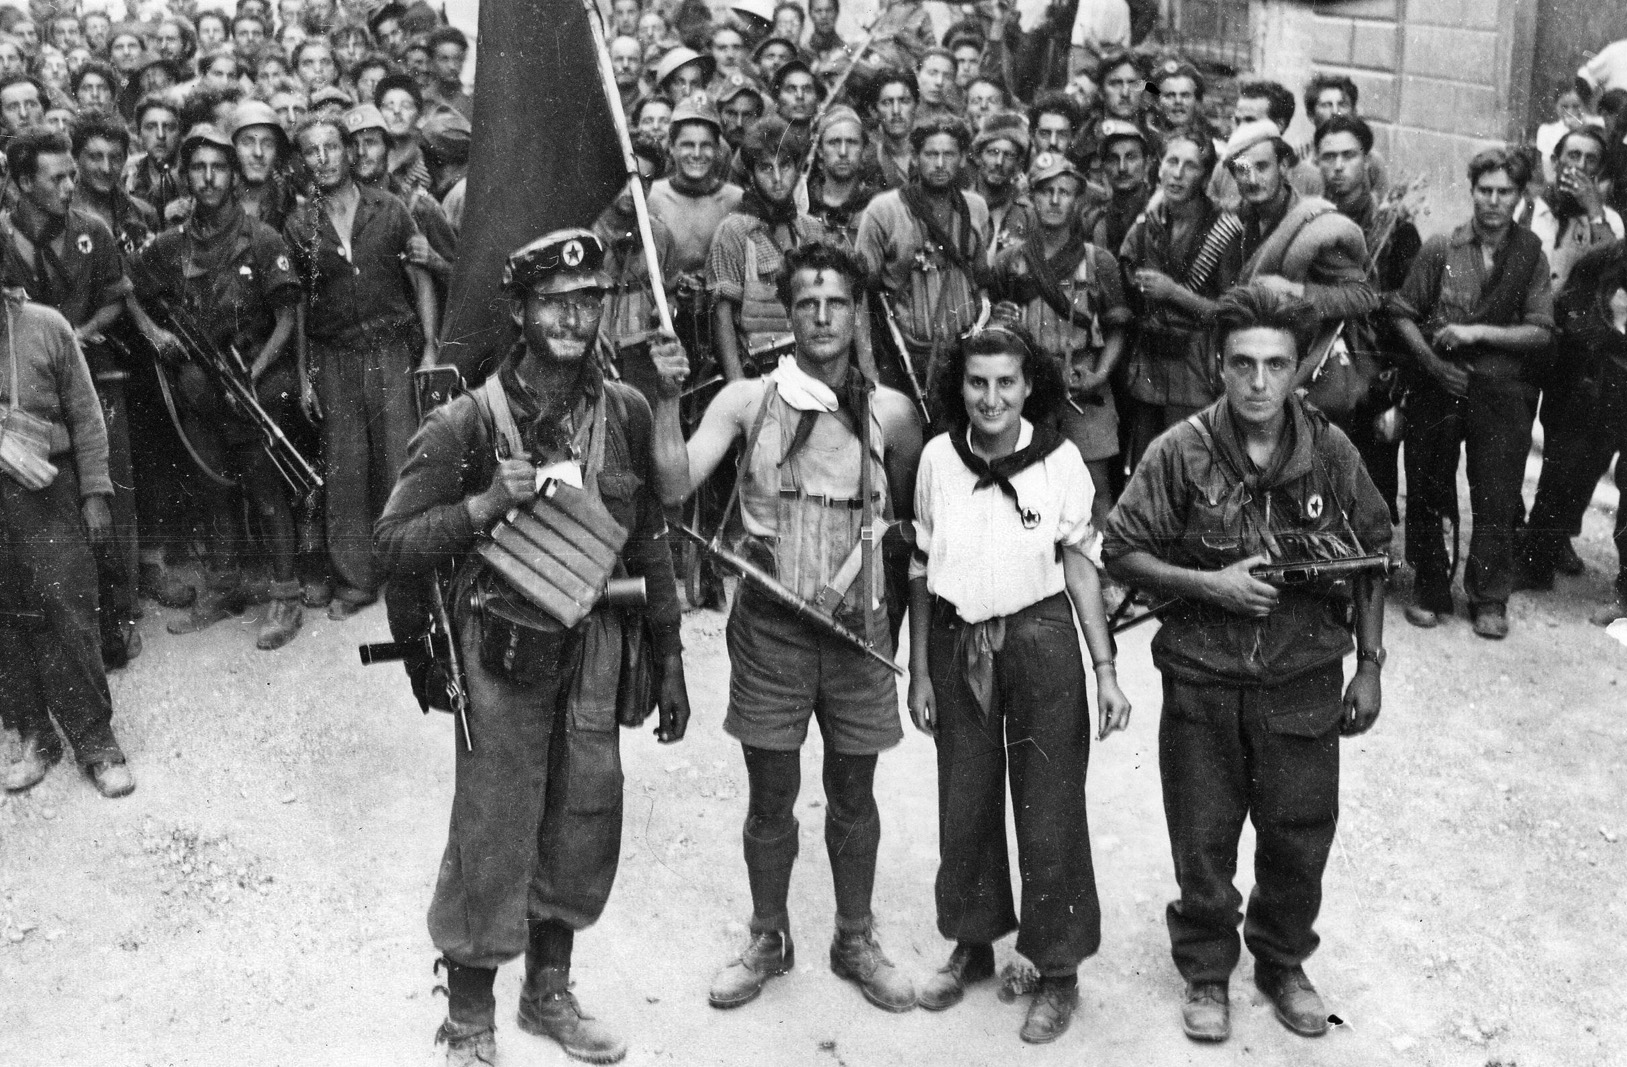 Photographed after the liberation of the city of Florence, these Italian partisans appear to be members of the National Liberation Committee, a group that included diverse political organizations.